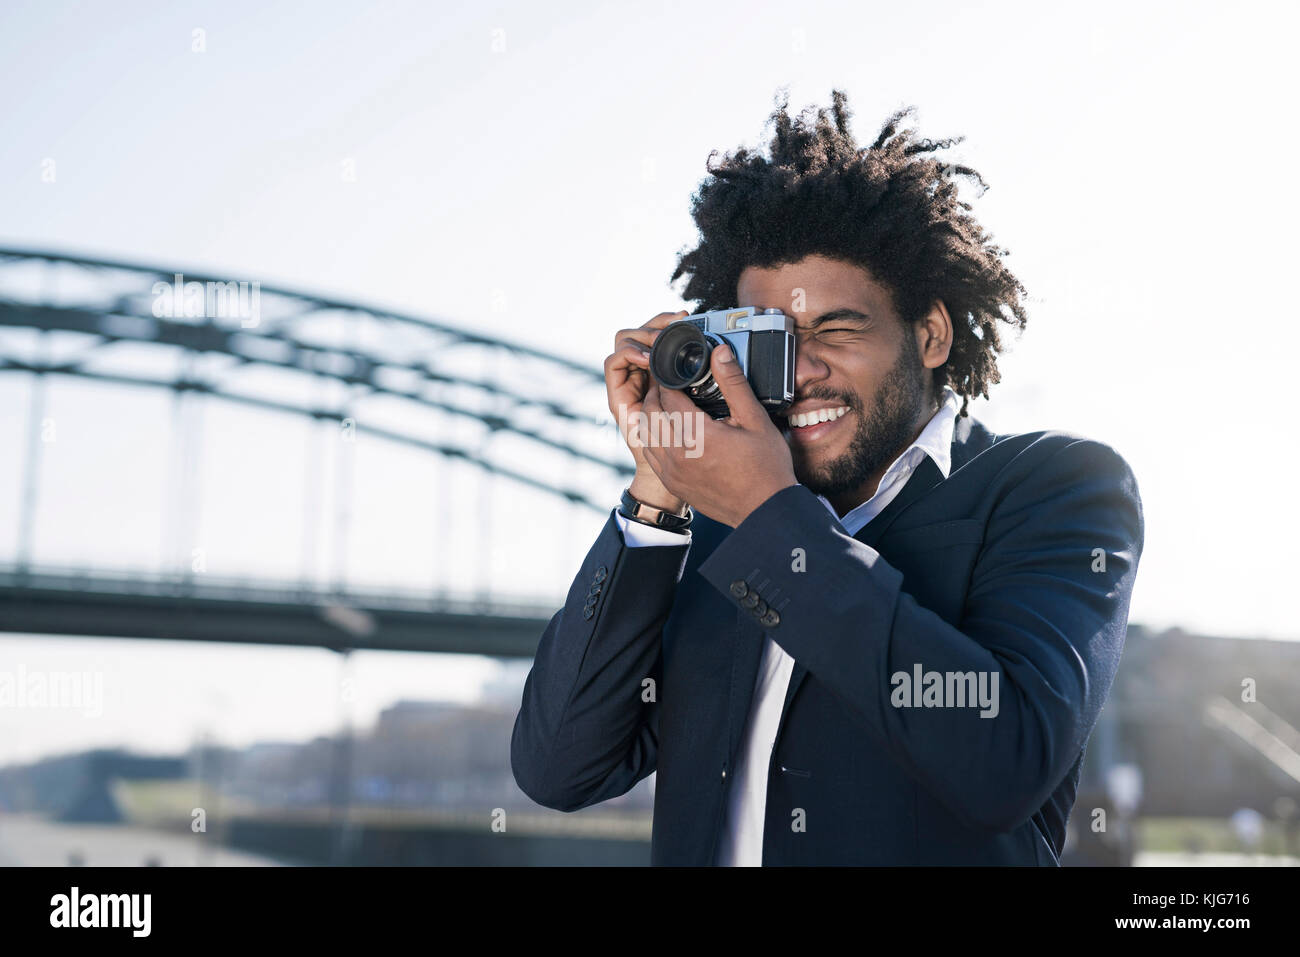 Smiling man in suit at the riverside taking a picture with a vintage camera Stock Photo